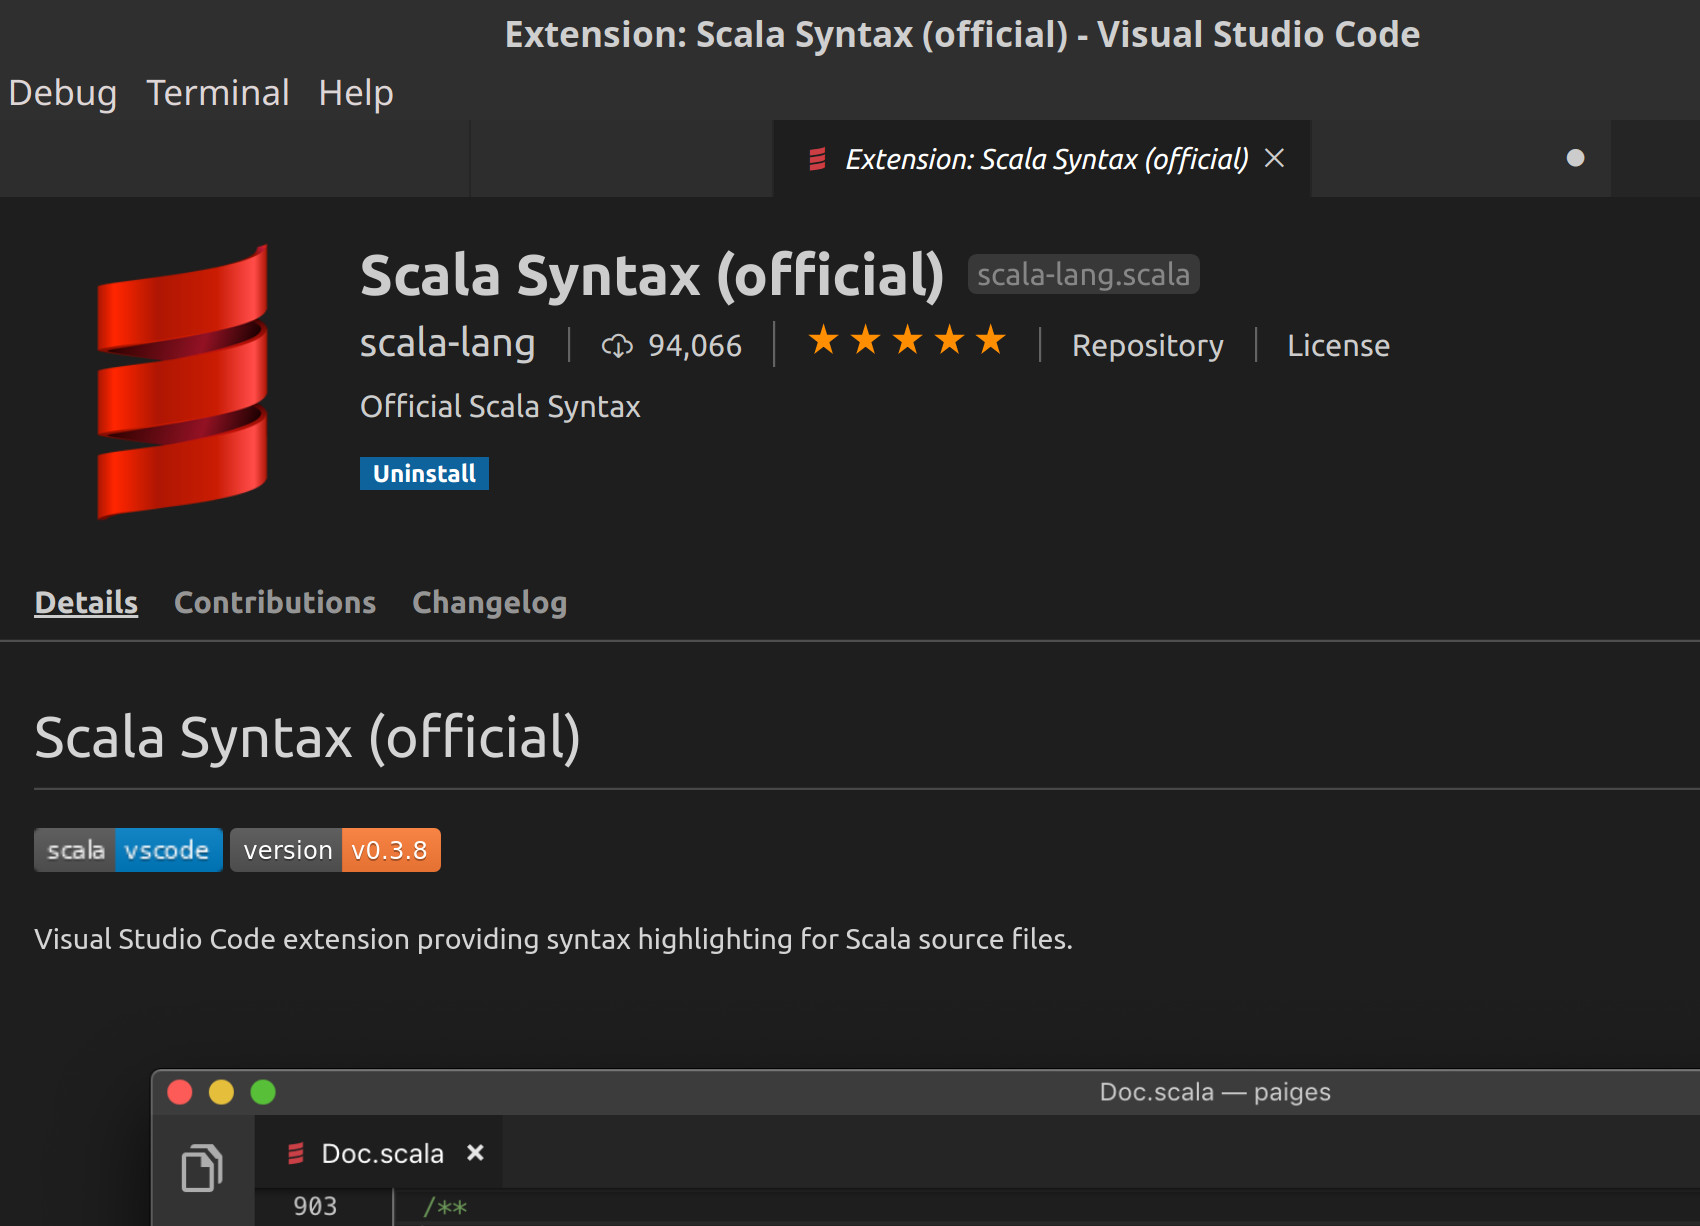 Screenshot of the Scala Syntax extension for Visual Studio Code